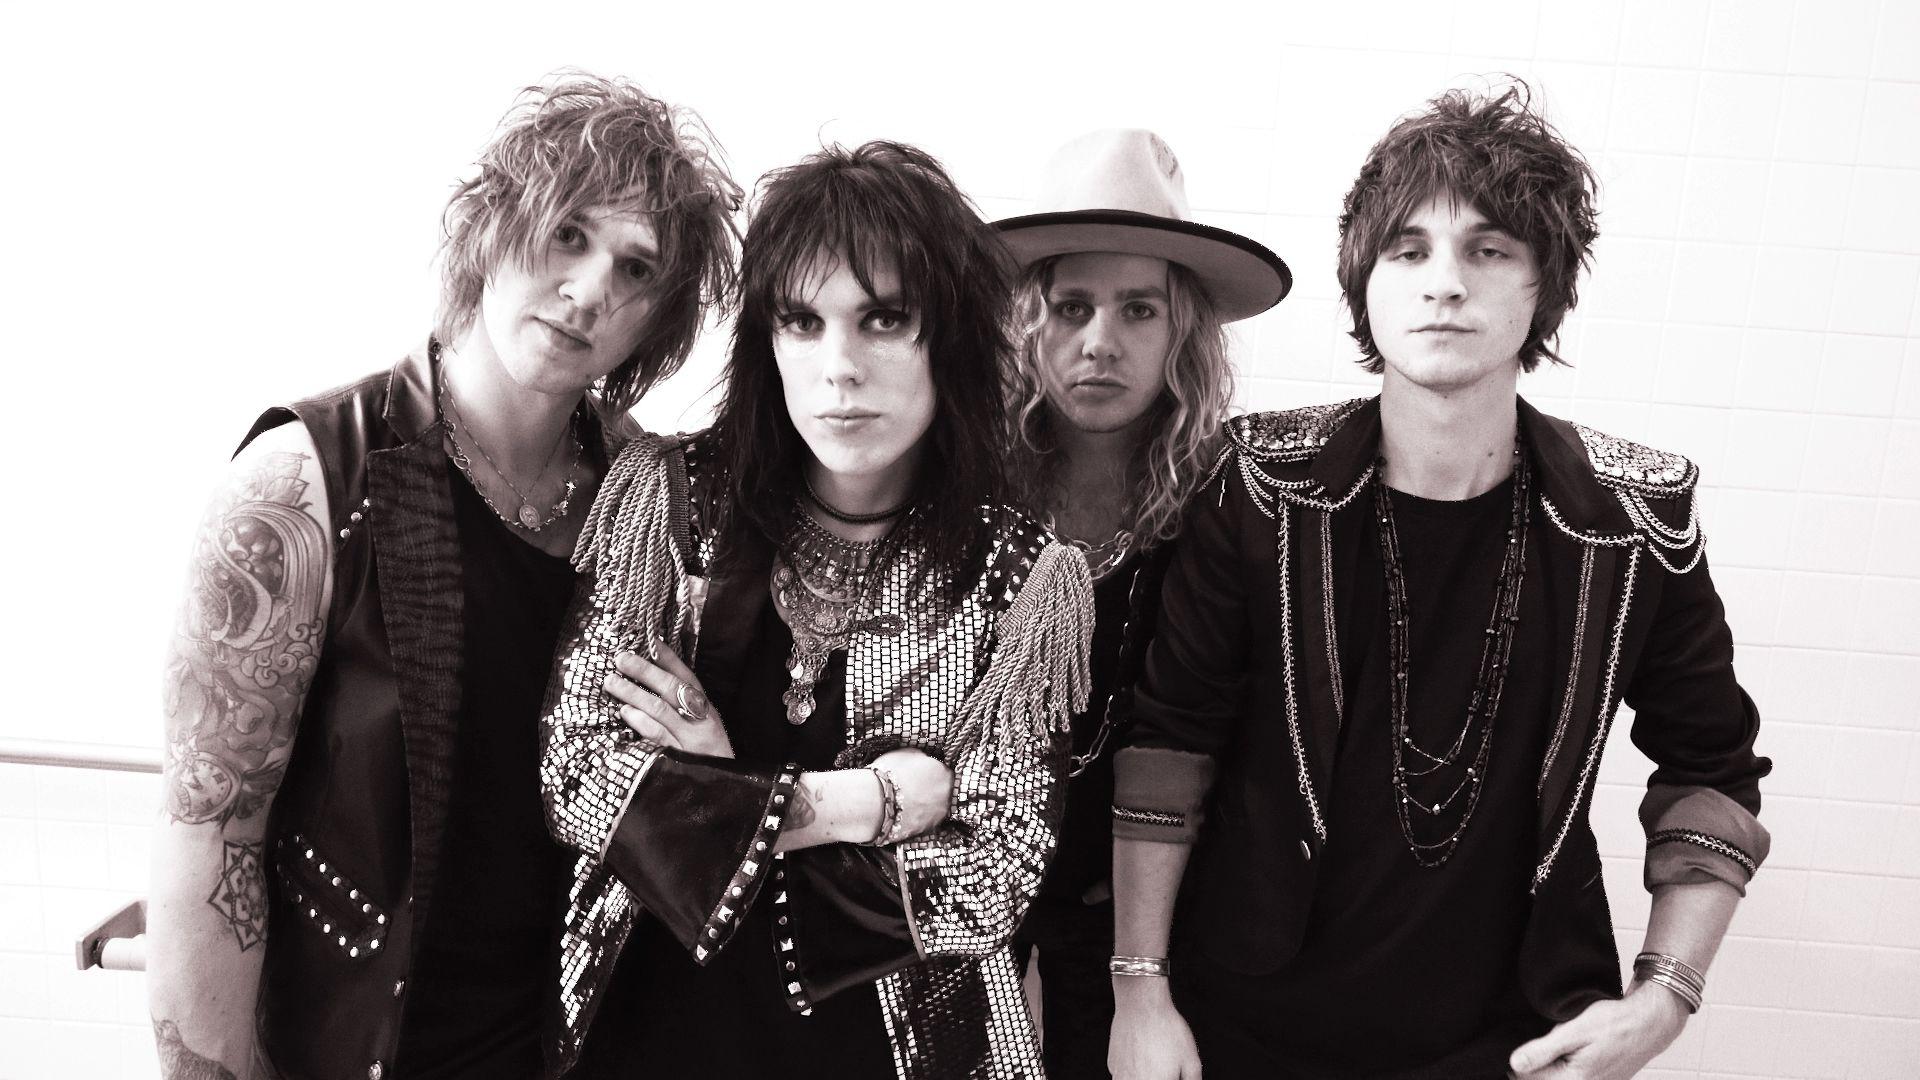 The Struts - Kiss This (American Tour 2015)